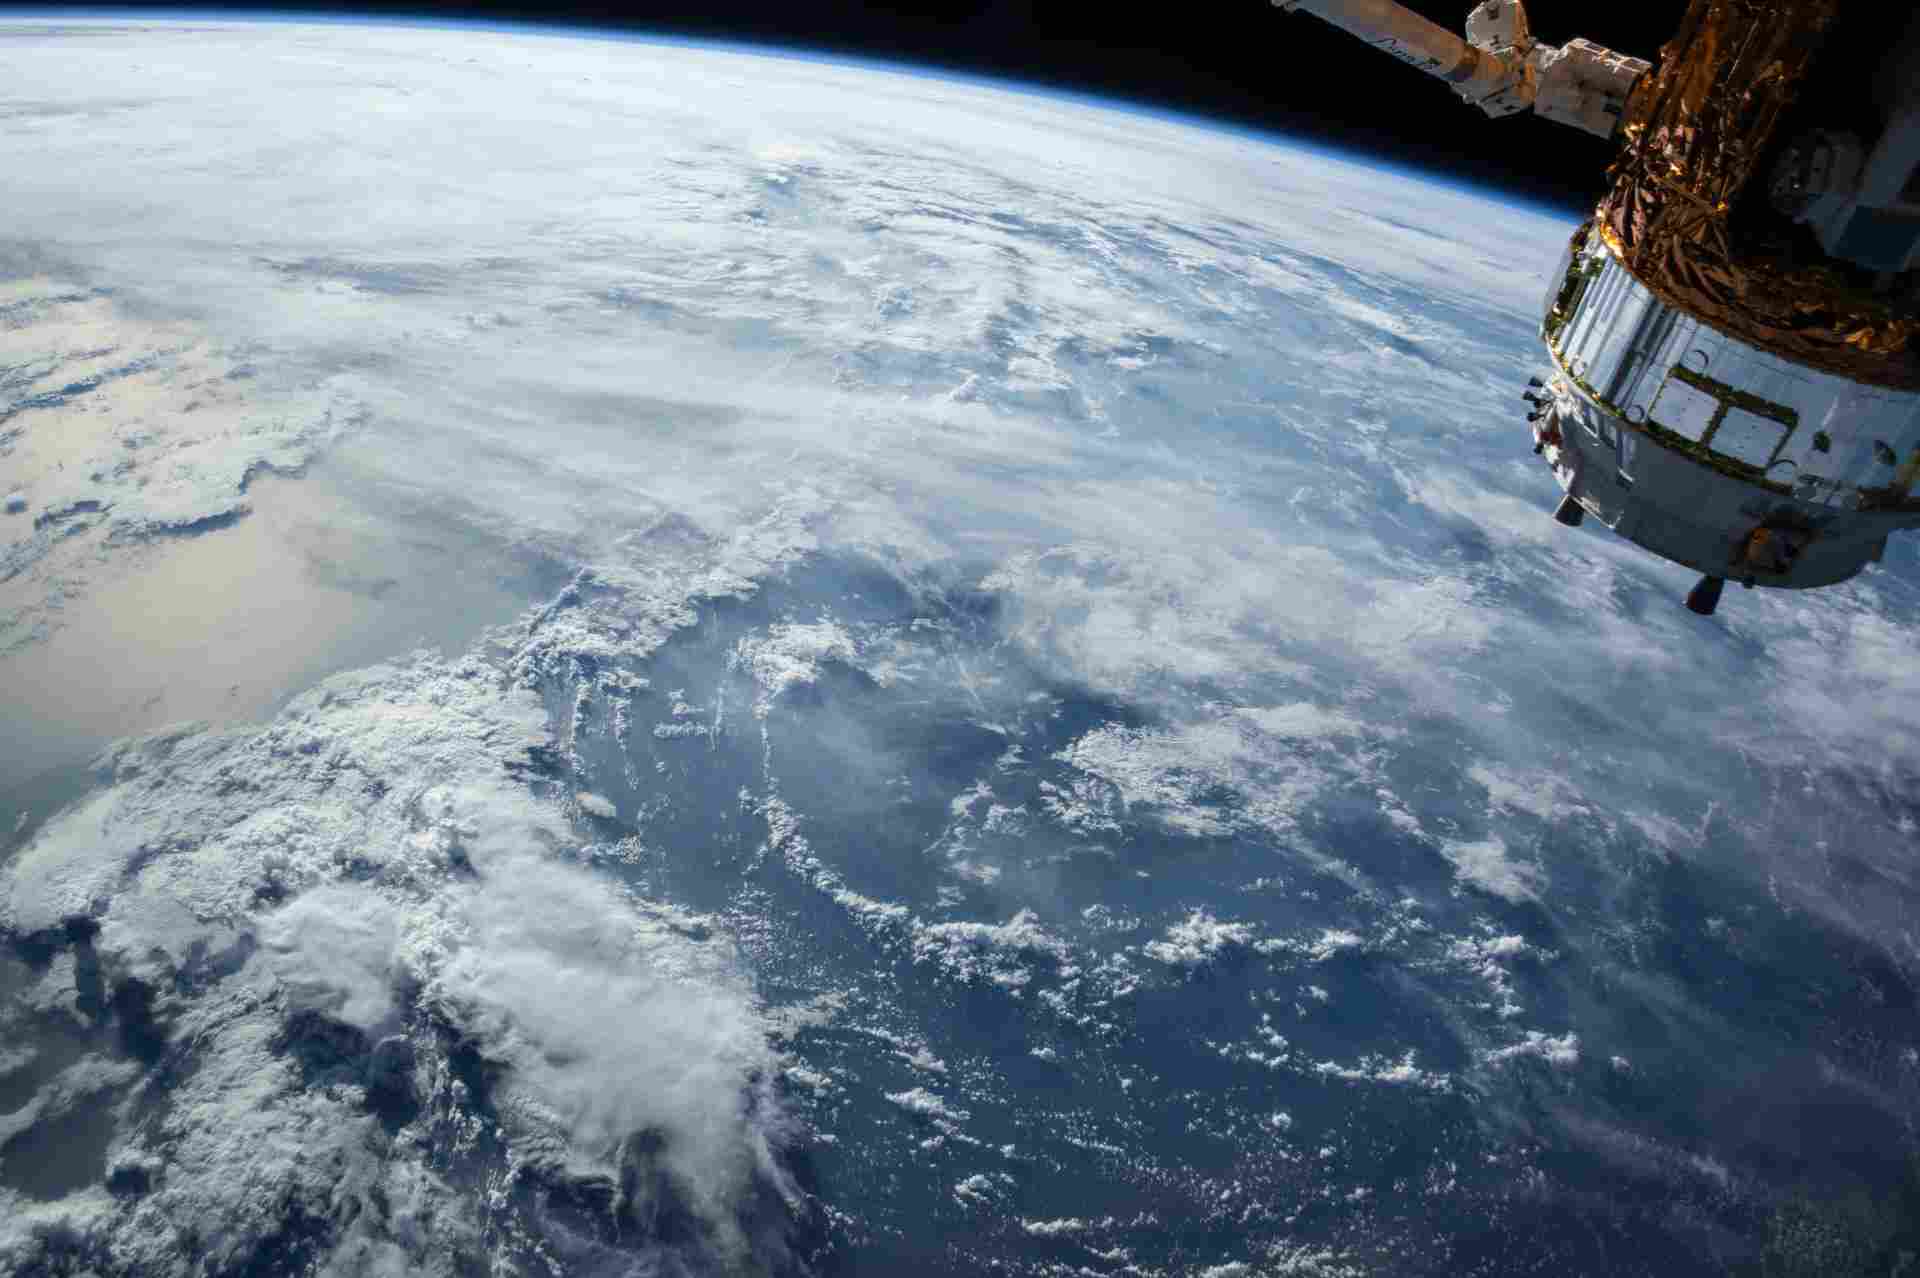 View of the Earth from the ISS